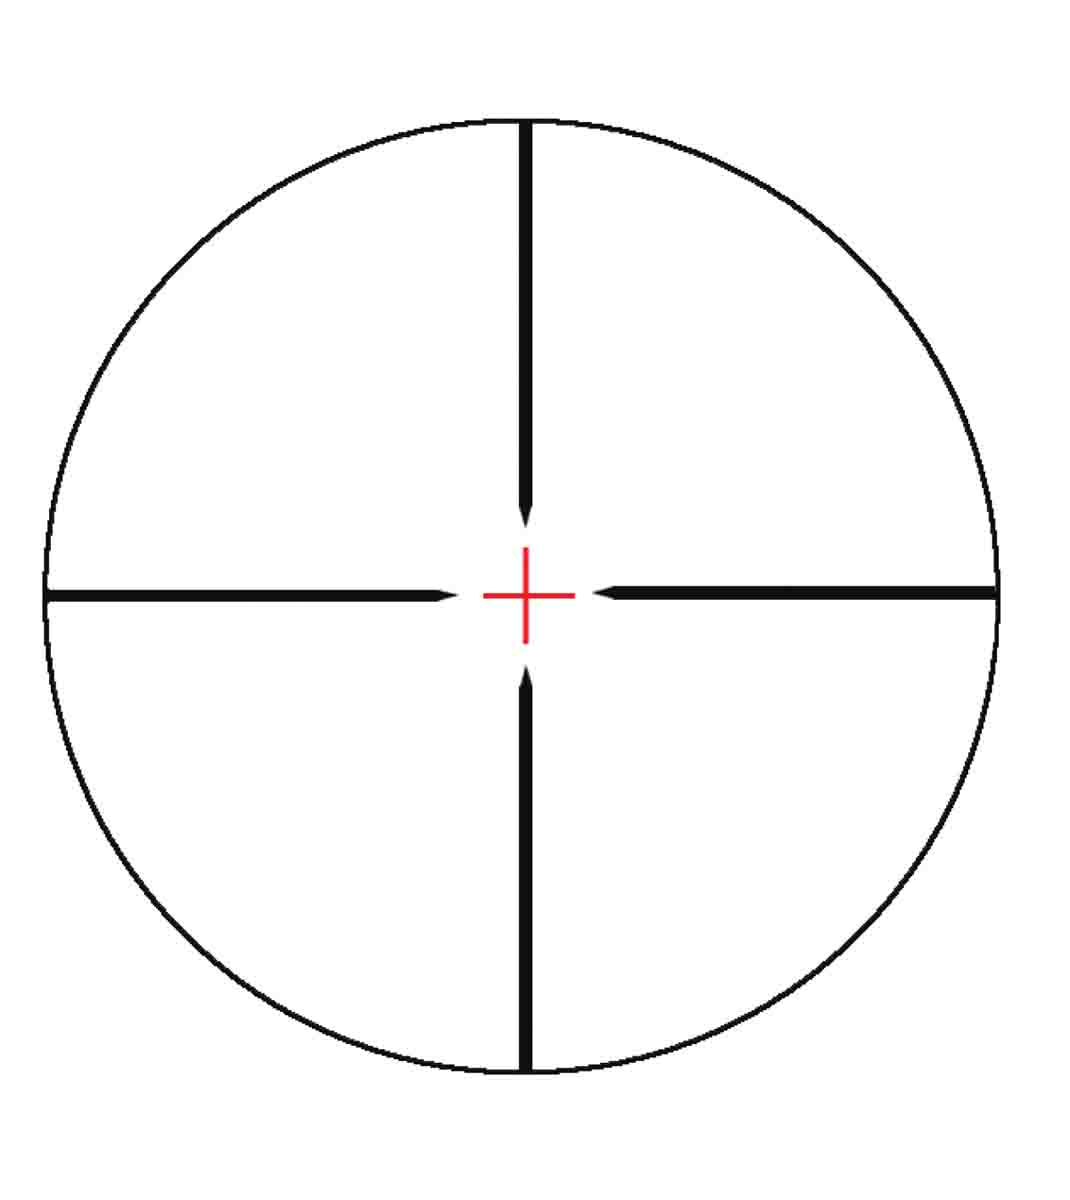 The Konus 30/30 reticle features a lighted cross at its center.